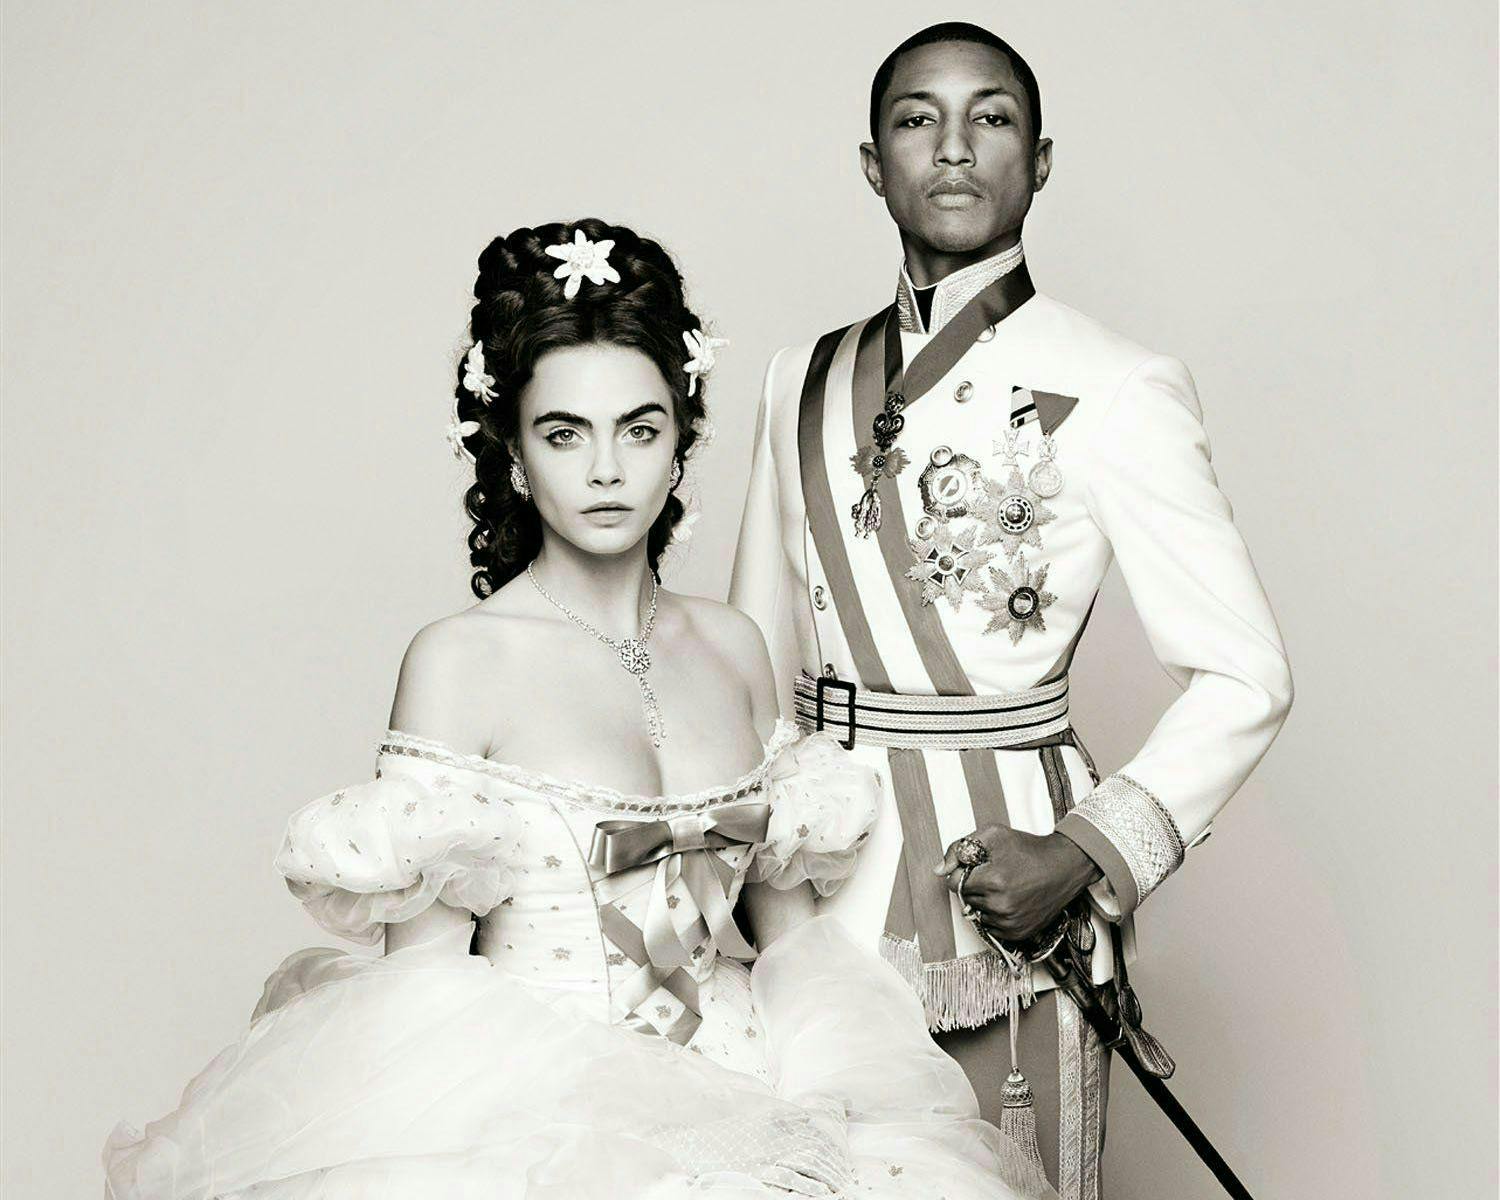 cara delevingne court dress fashion of the period musical (genre) pharrell williams reincarnation scene still clothing apparel person wedding gown wedding gown robe female woman